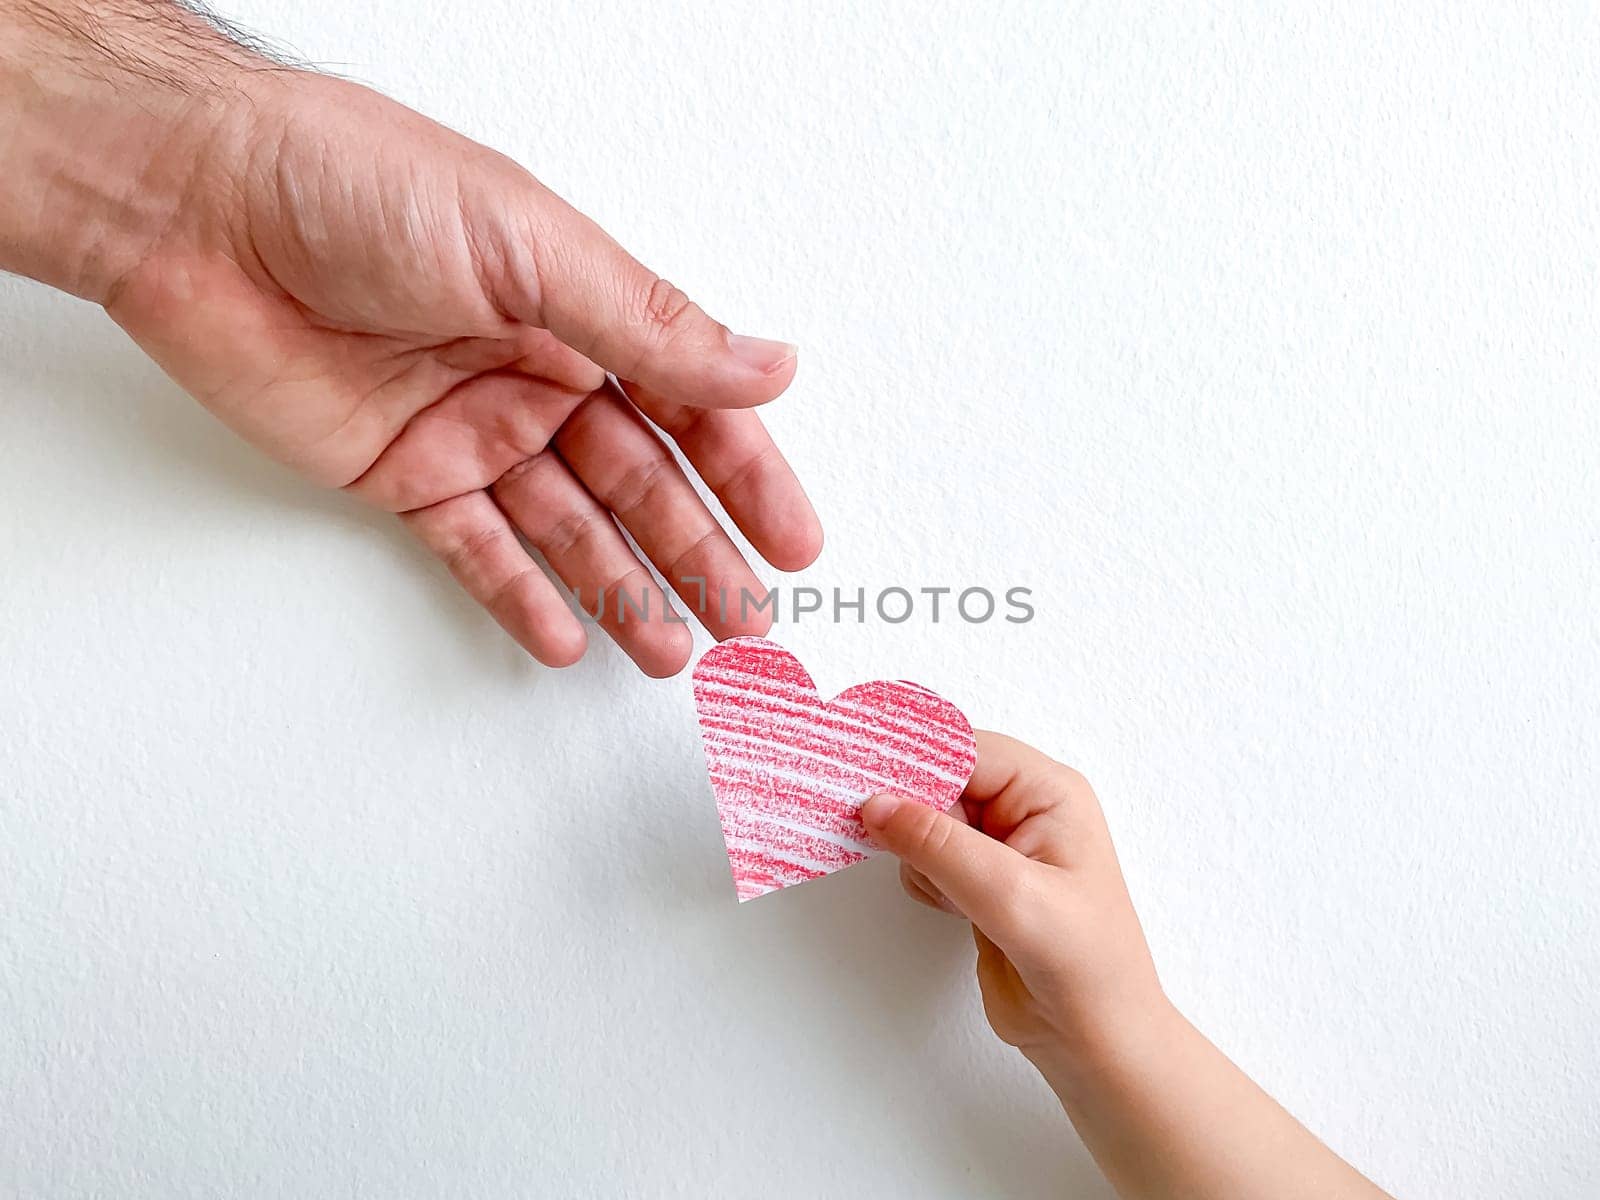 Adult hand giving striped pink paper heart to childs hand, concept of love, care, and family bonding with copy space. Can be utilized for materials about parenting, child development, and family relationships. It is ideal for use in educational contexts, social services, and psychology resources. by Lunnica